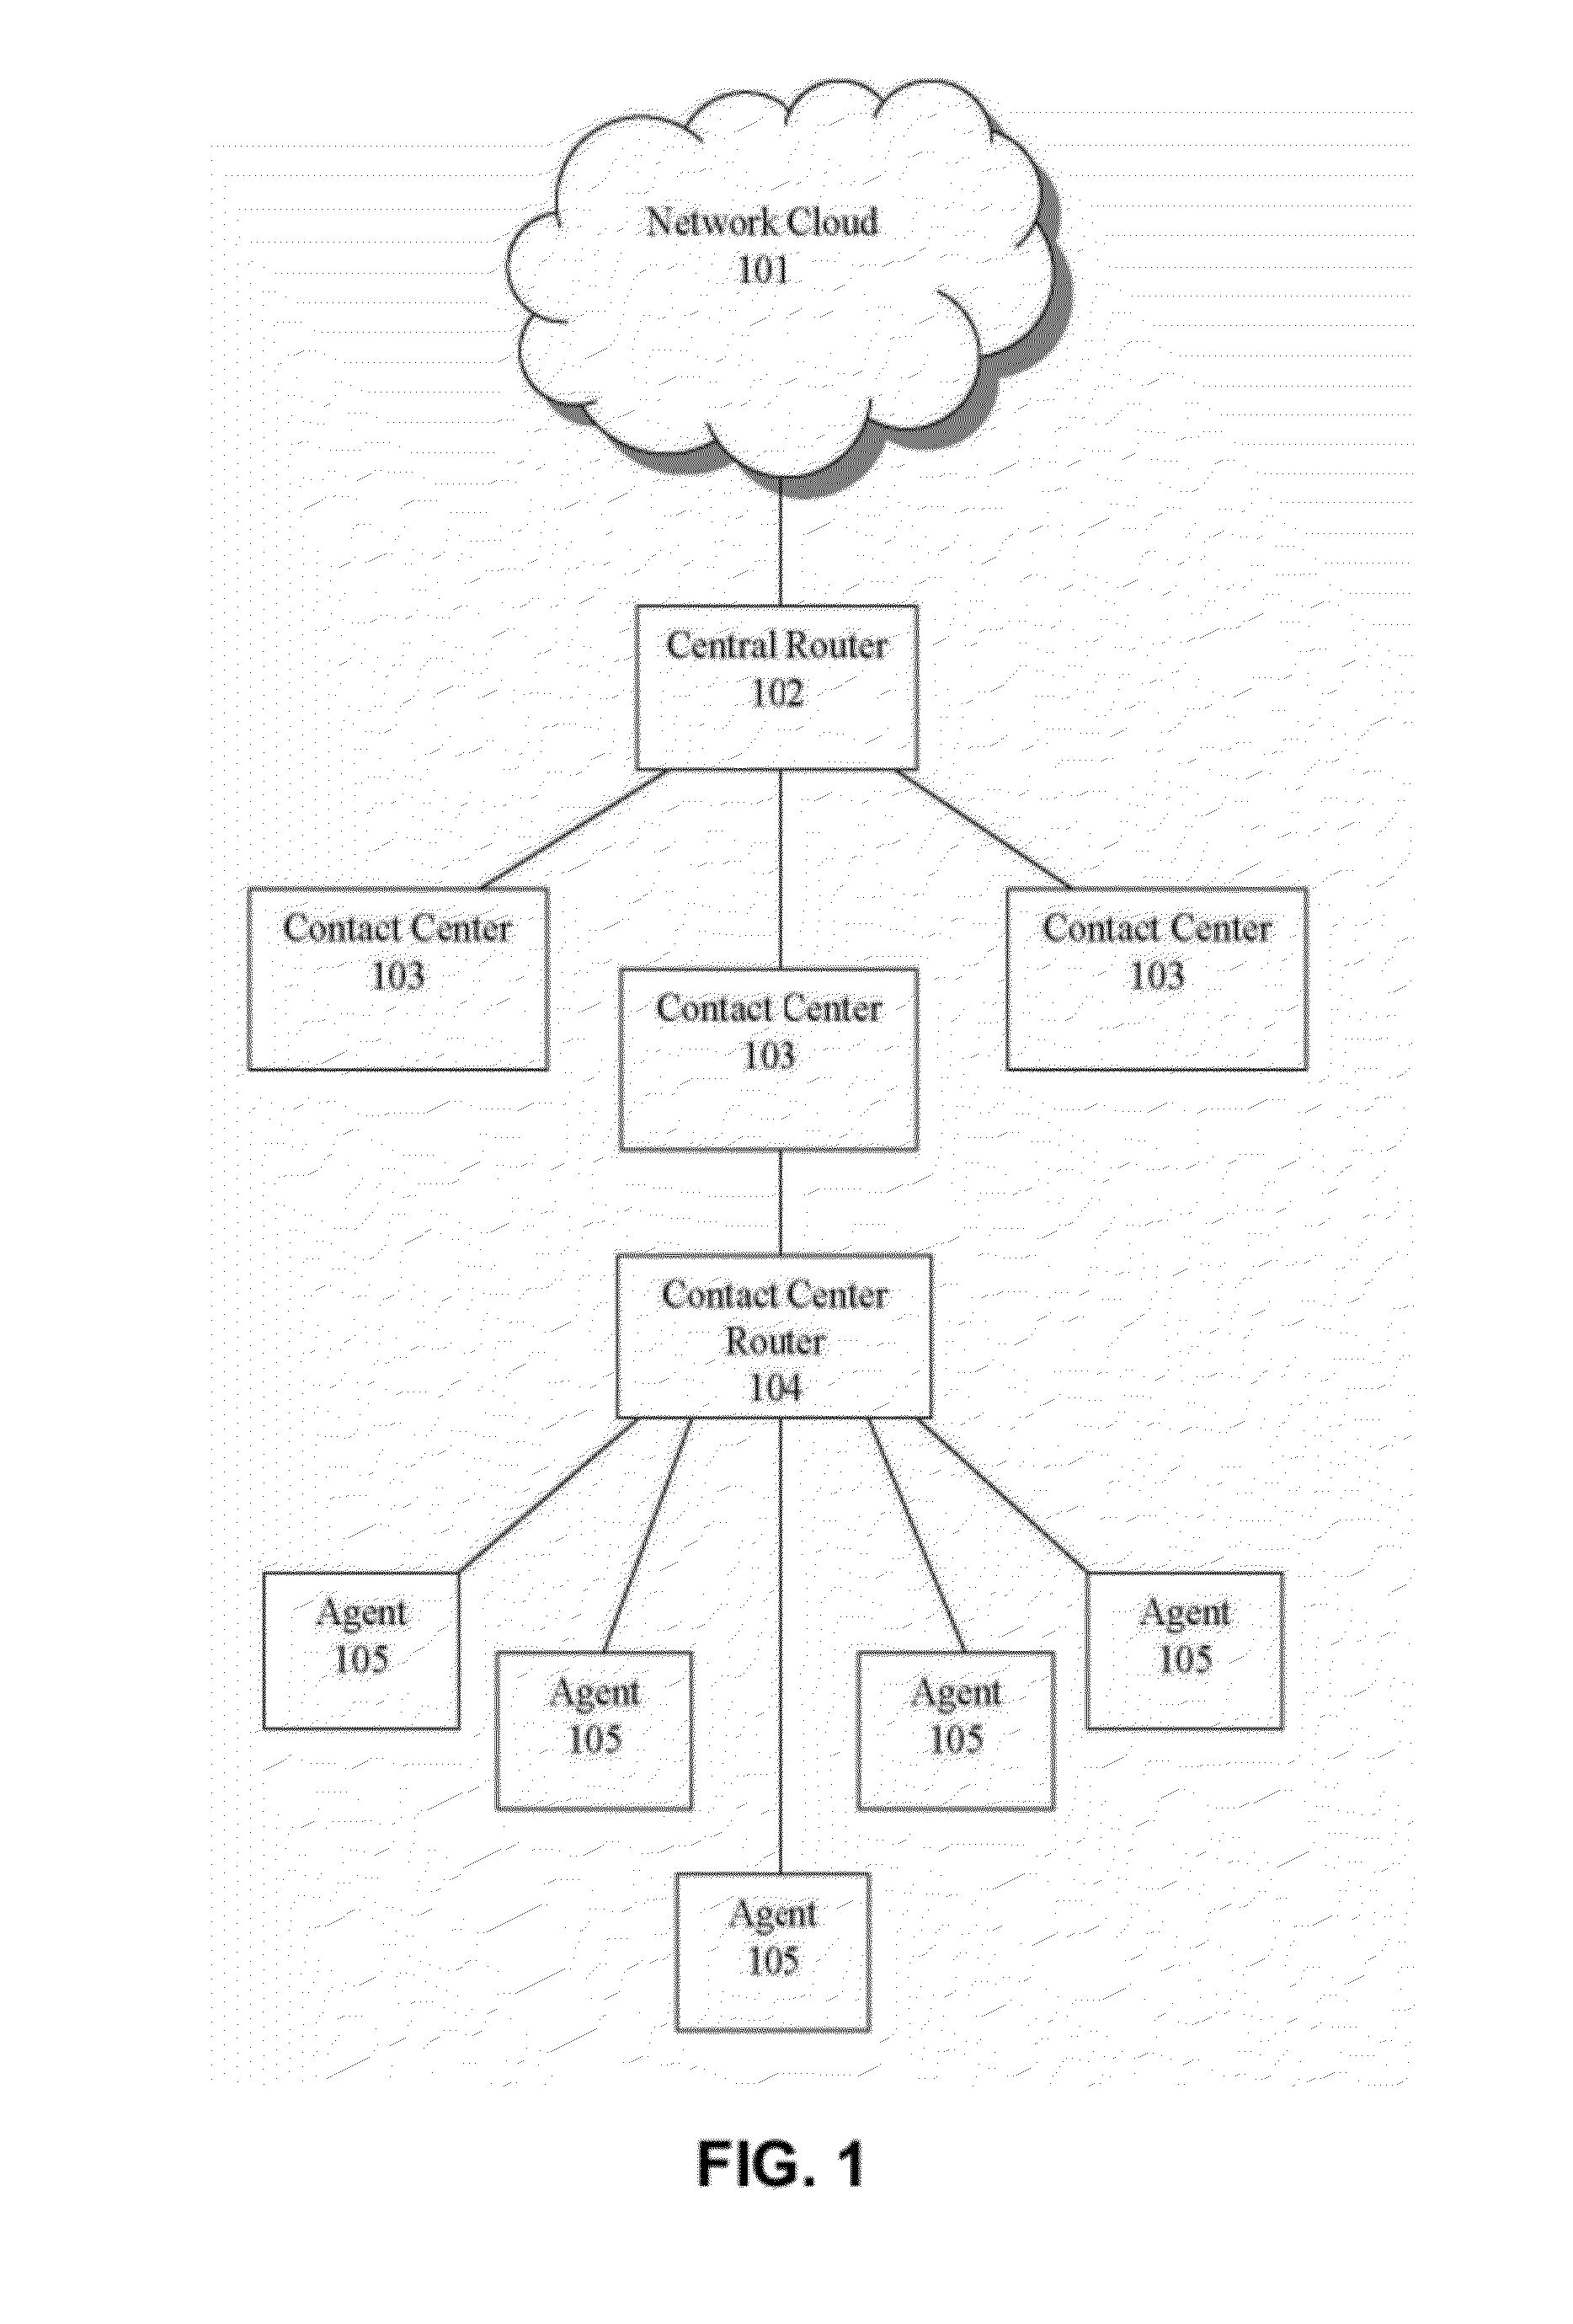 Precalculated caller-agent pairs for a call center routing system